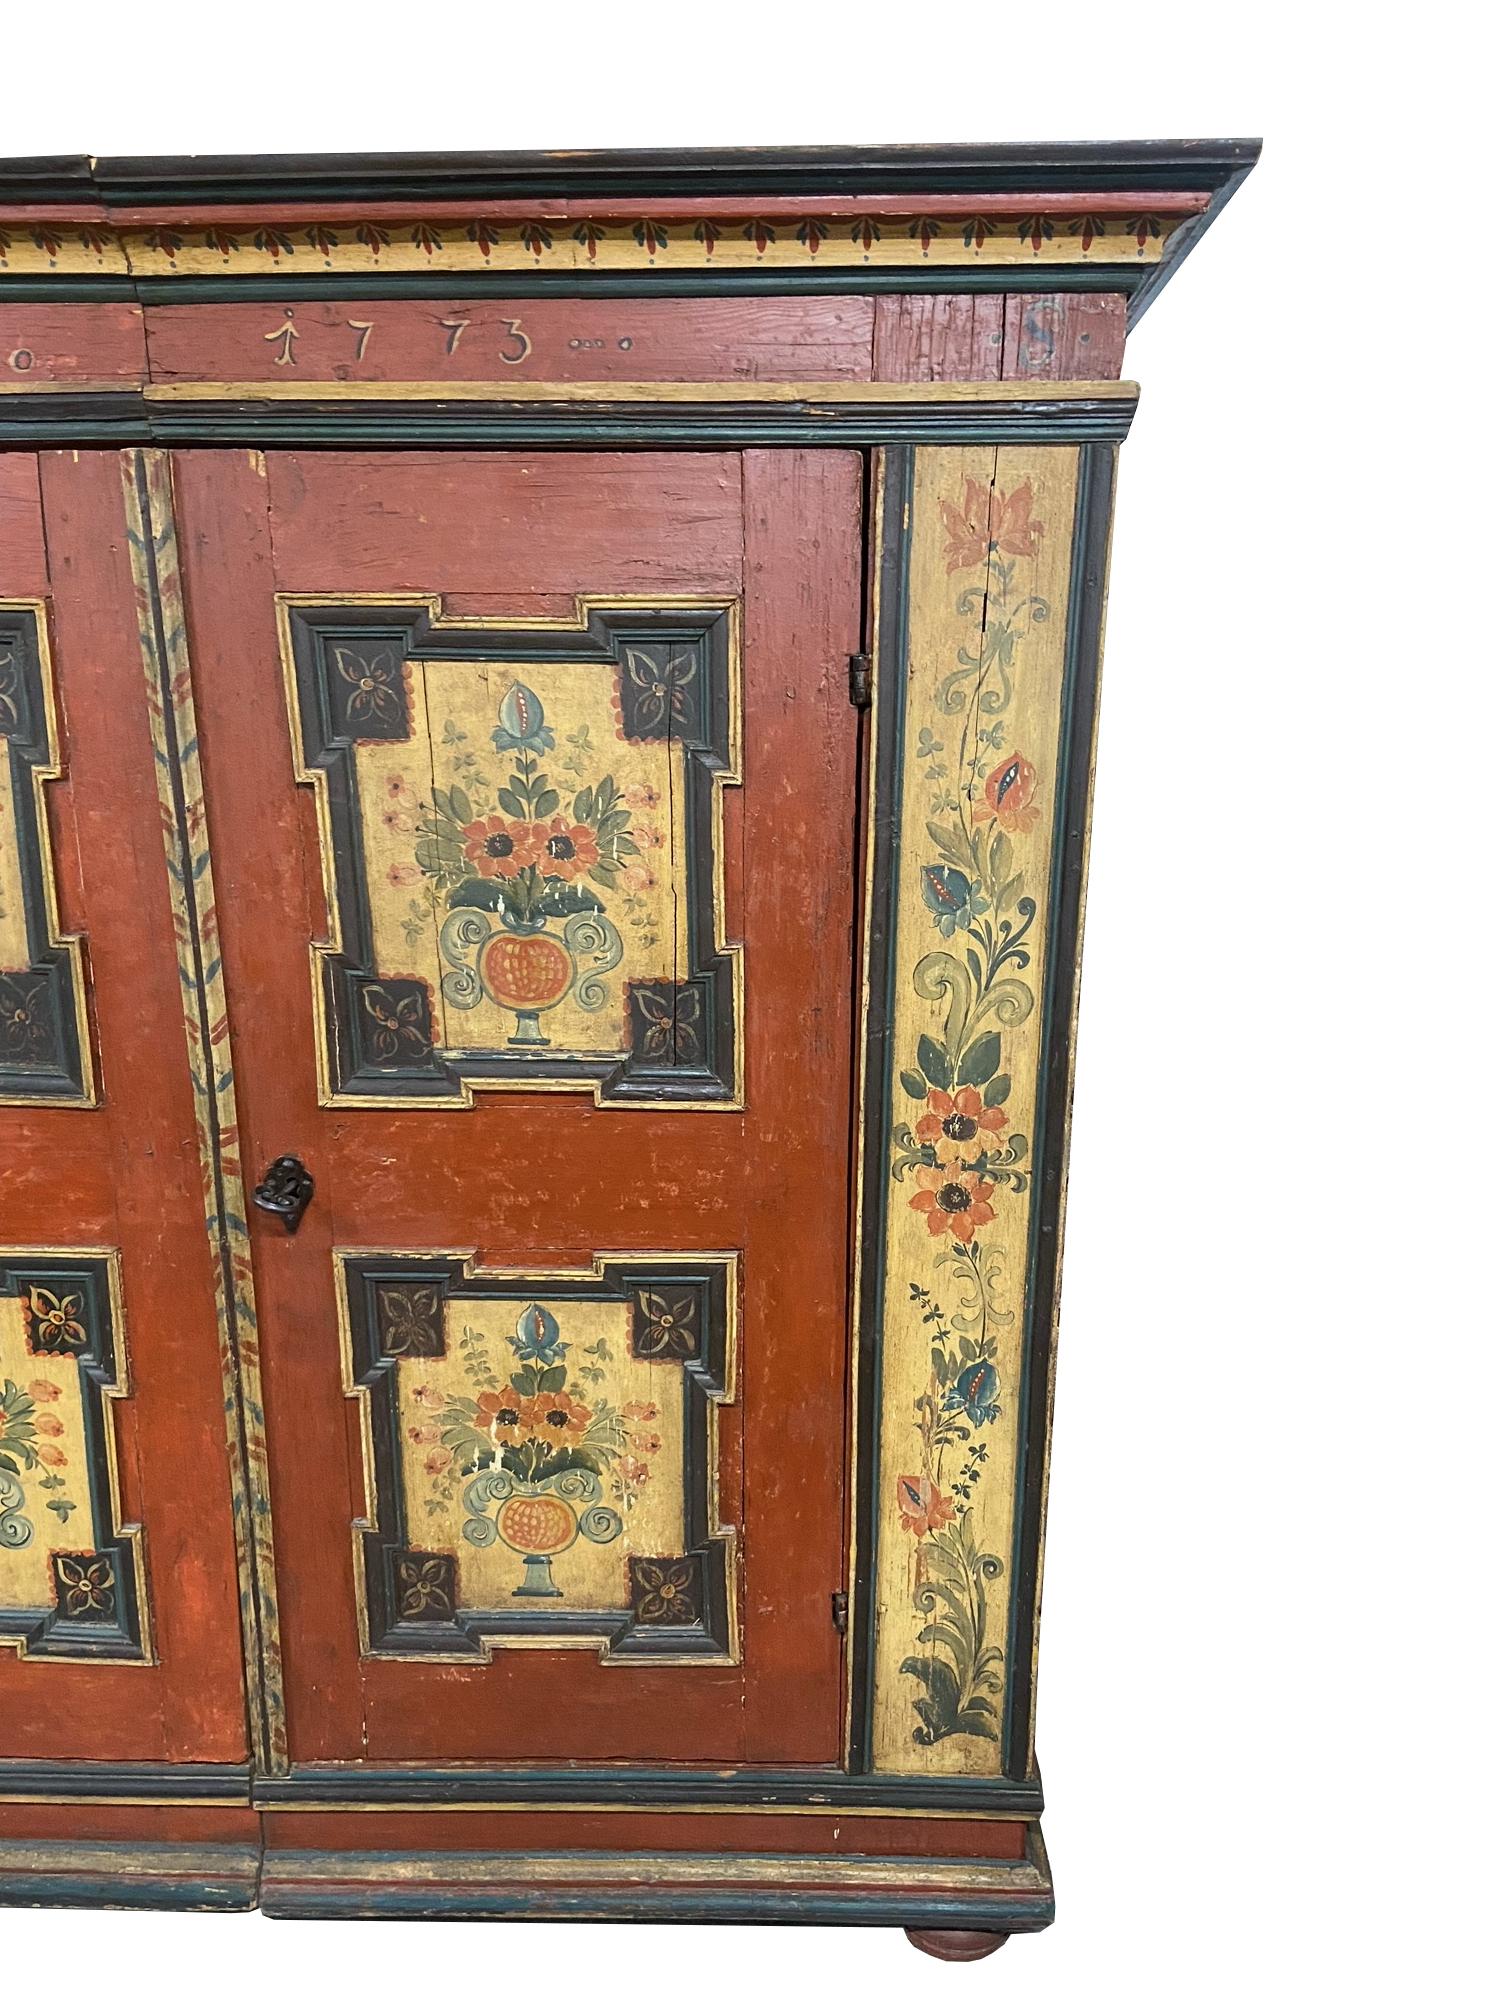 18th Century painted Bavarian pine cupboard hand painted in red, tan, and blue black. Four framed yellow squares depicting bouquets of flowers and two panels on the edges depicting more flowers.

Dimensions:
78.5?H x 79.5?W x 23?D.